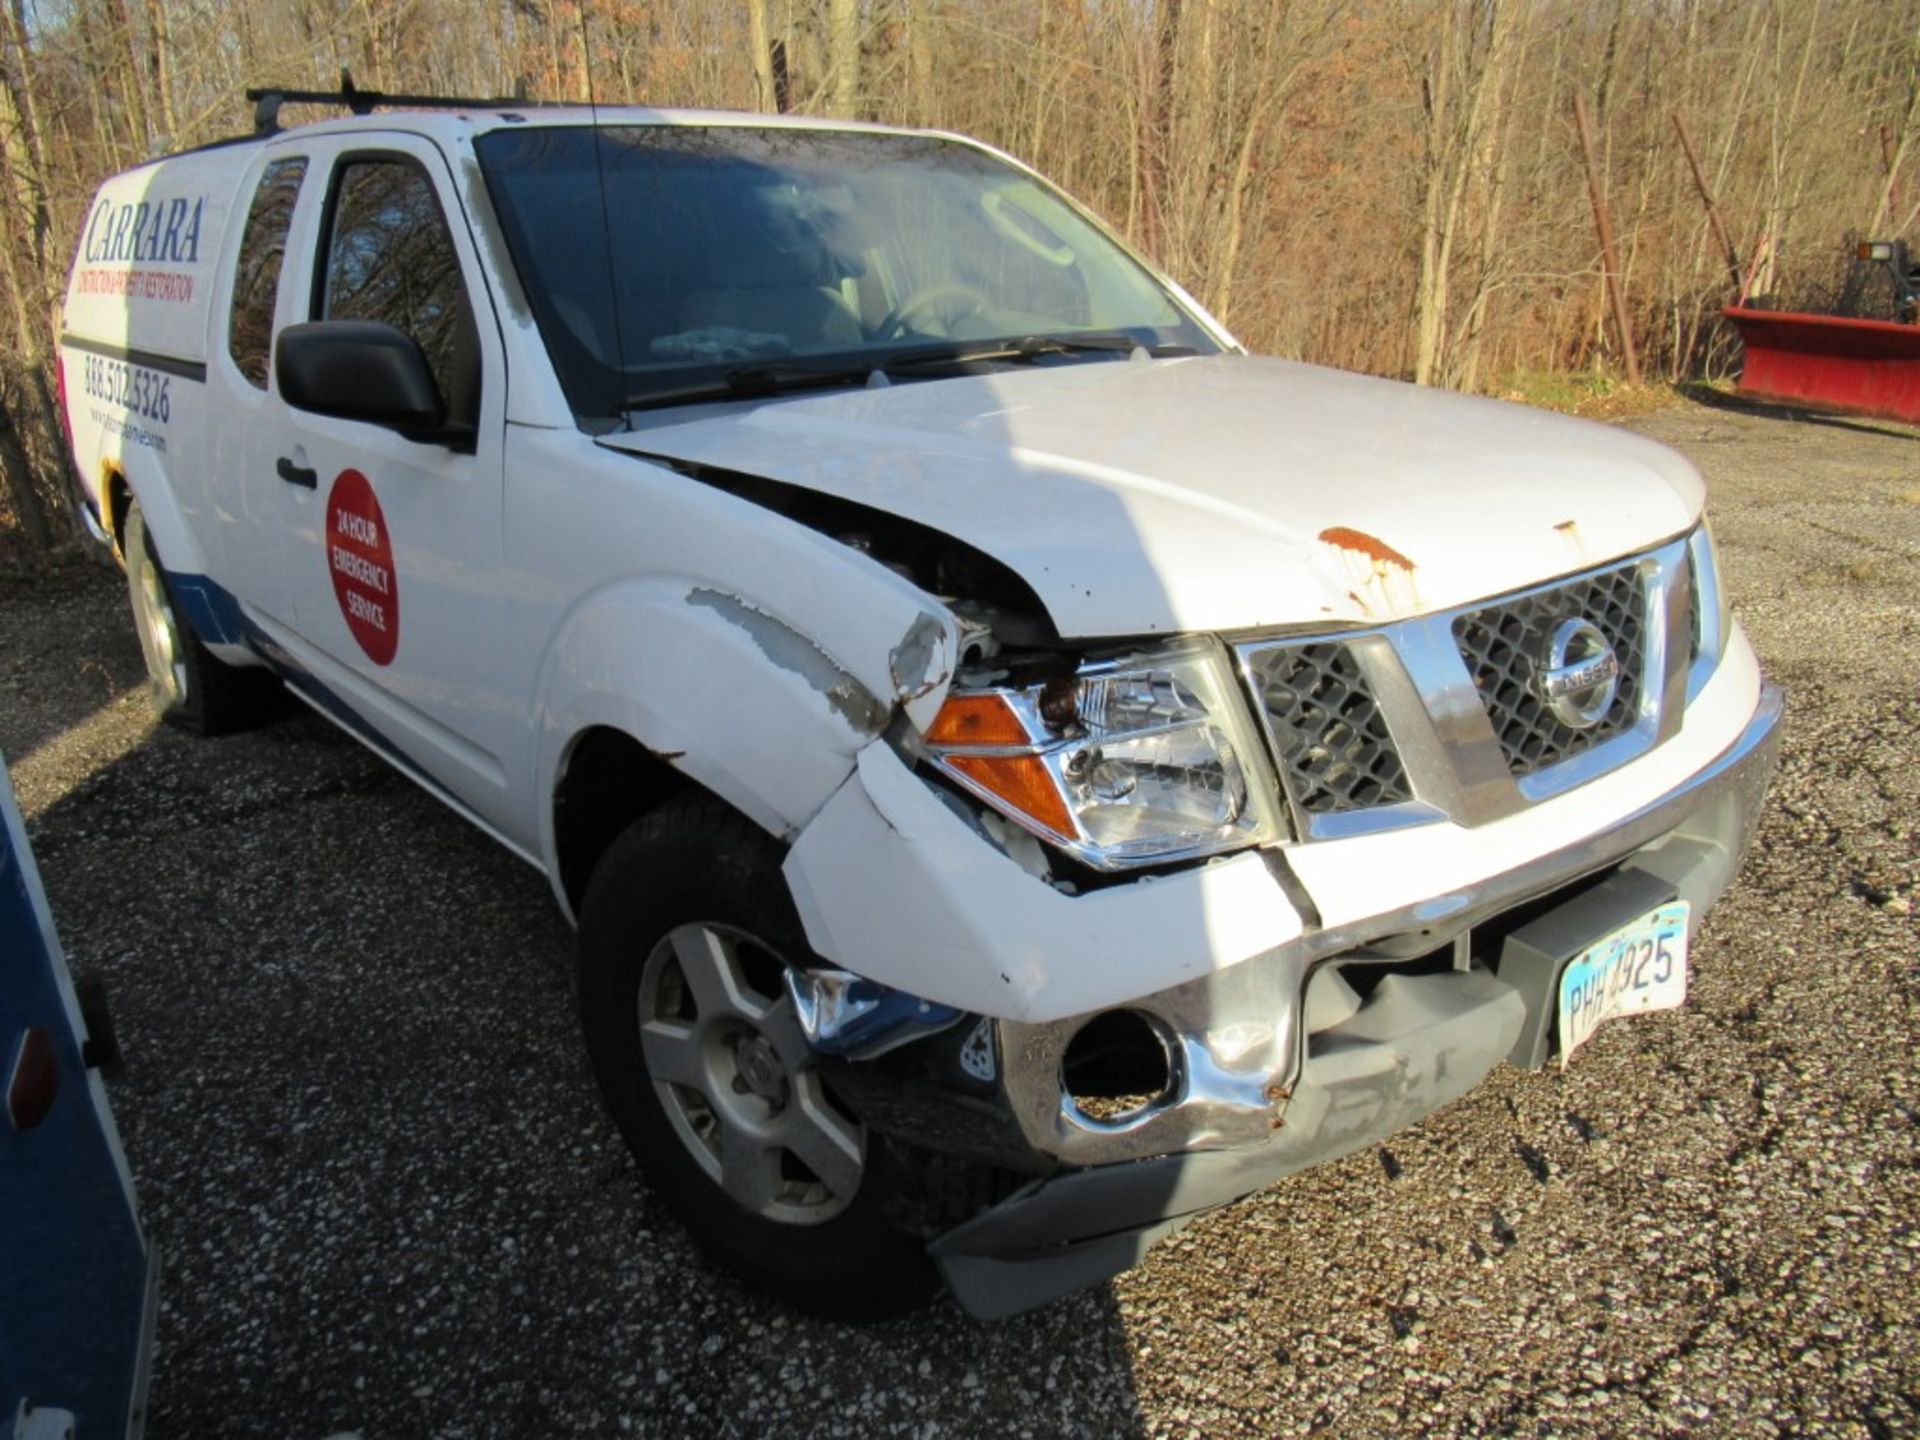 Wrecked 2005 Nissan Frontier Pickup, VIN 1NGAD06U05C427927, Extended Cab, Automatic, Cruise Control, - Image 2 of 20